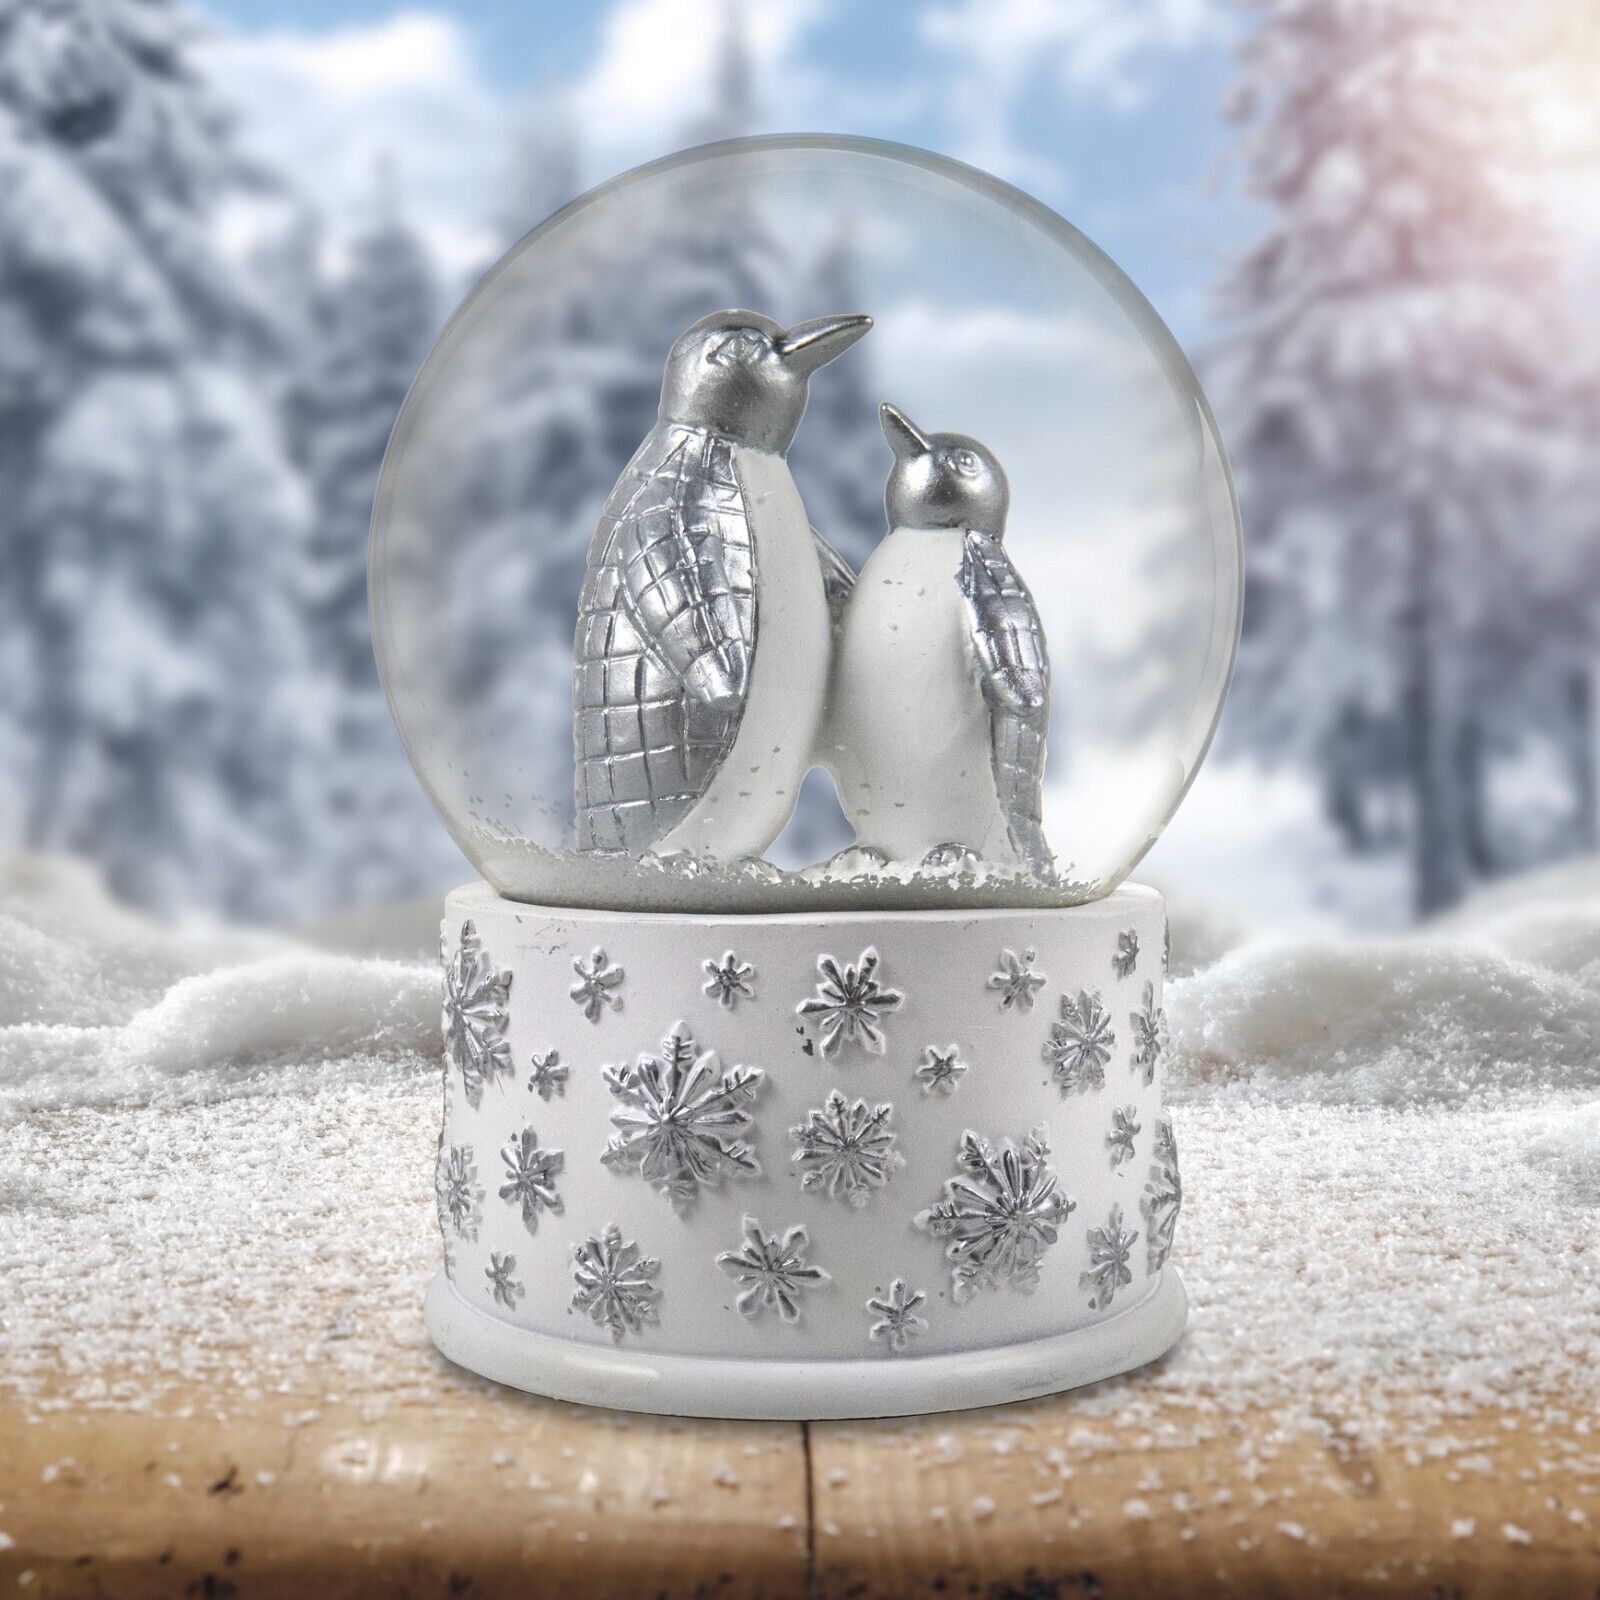 100mm Silver Penguins Playing Snow Globe by The San Francisco Music Box Company